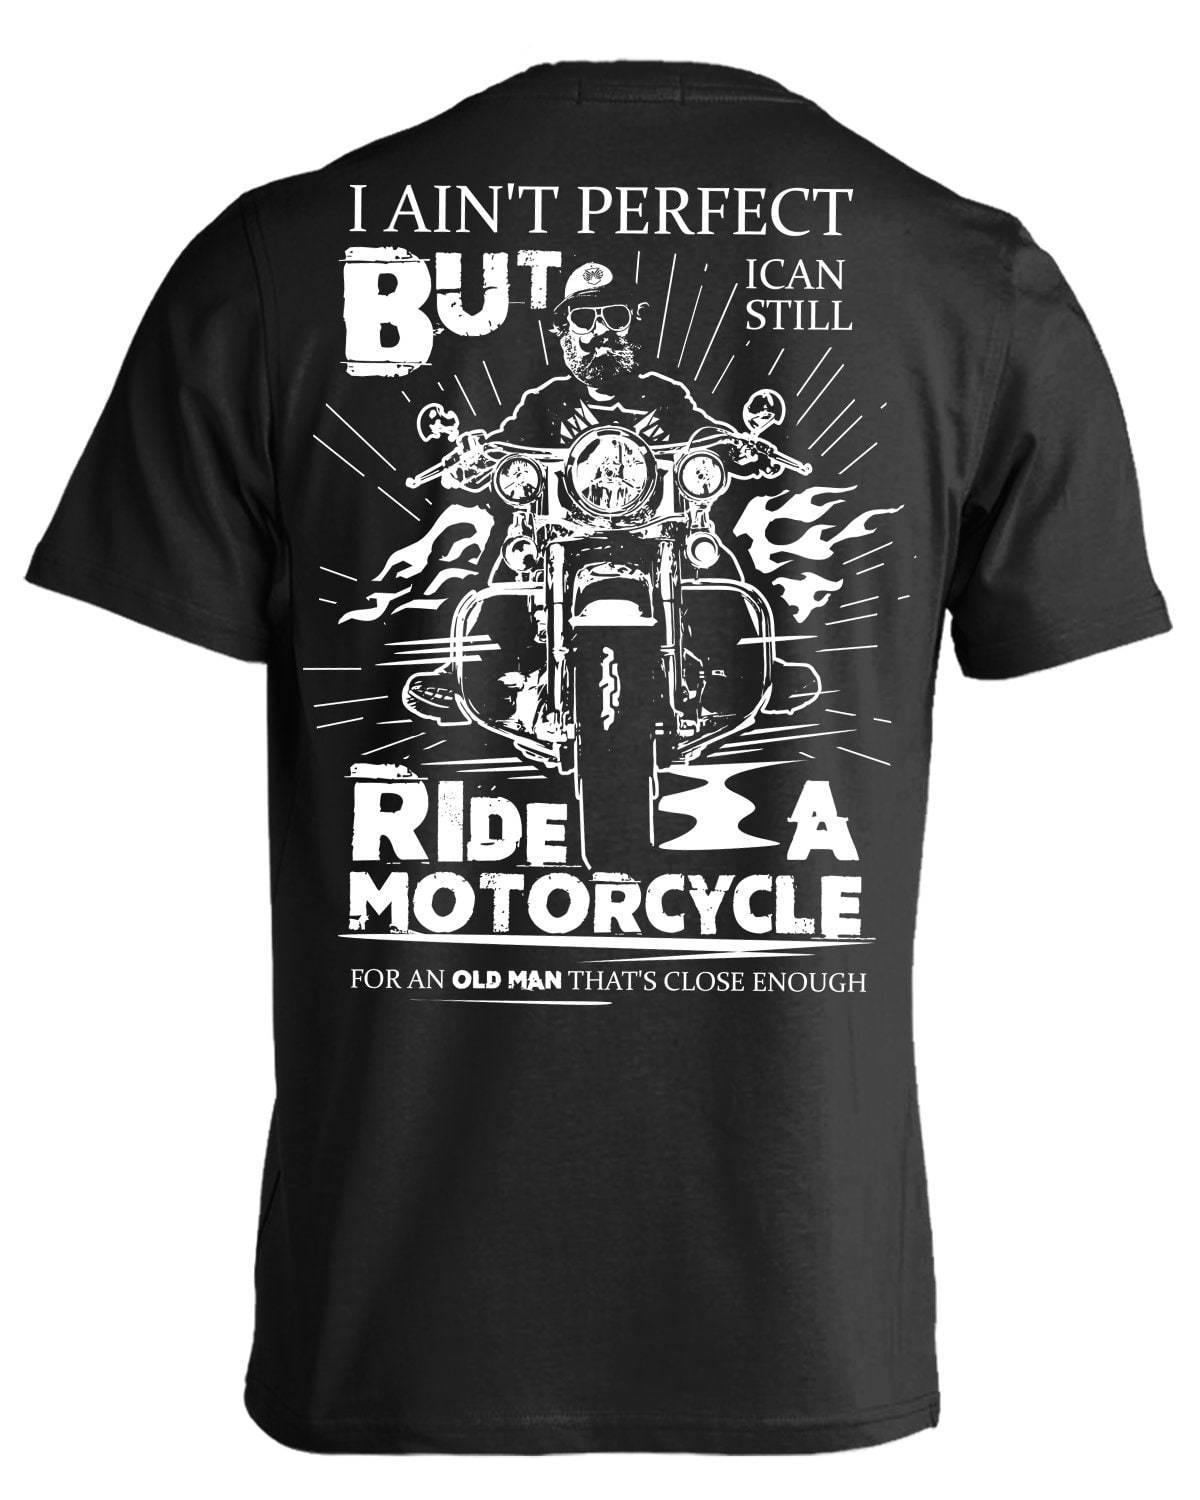 I Can Still Ride a Motorcycle T-Shirt - American Legend Rider